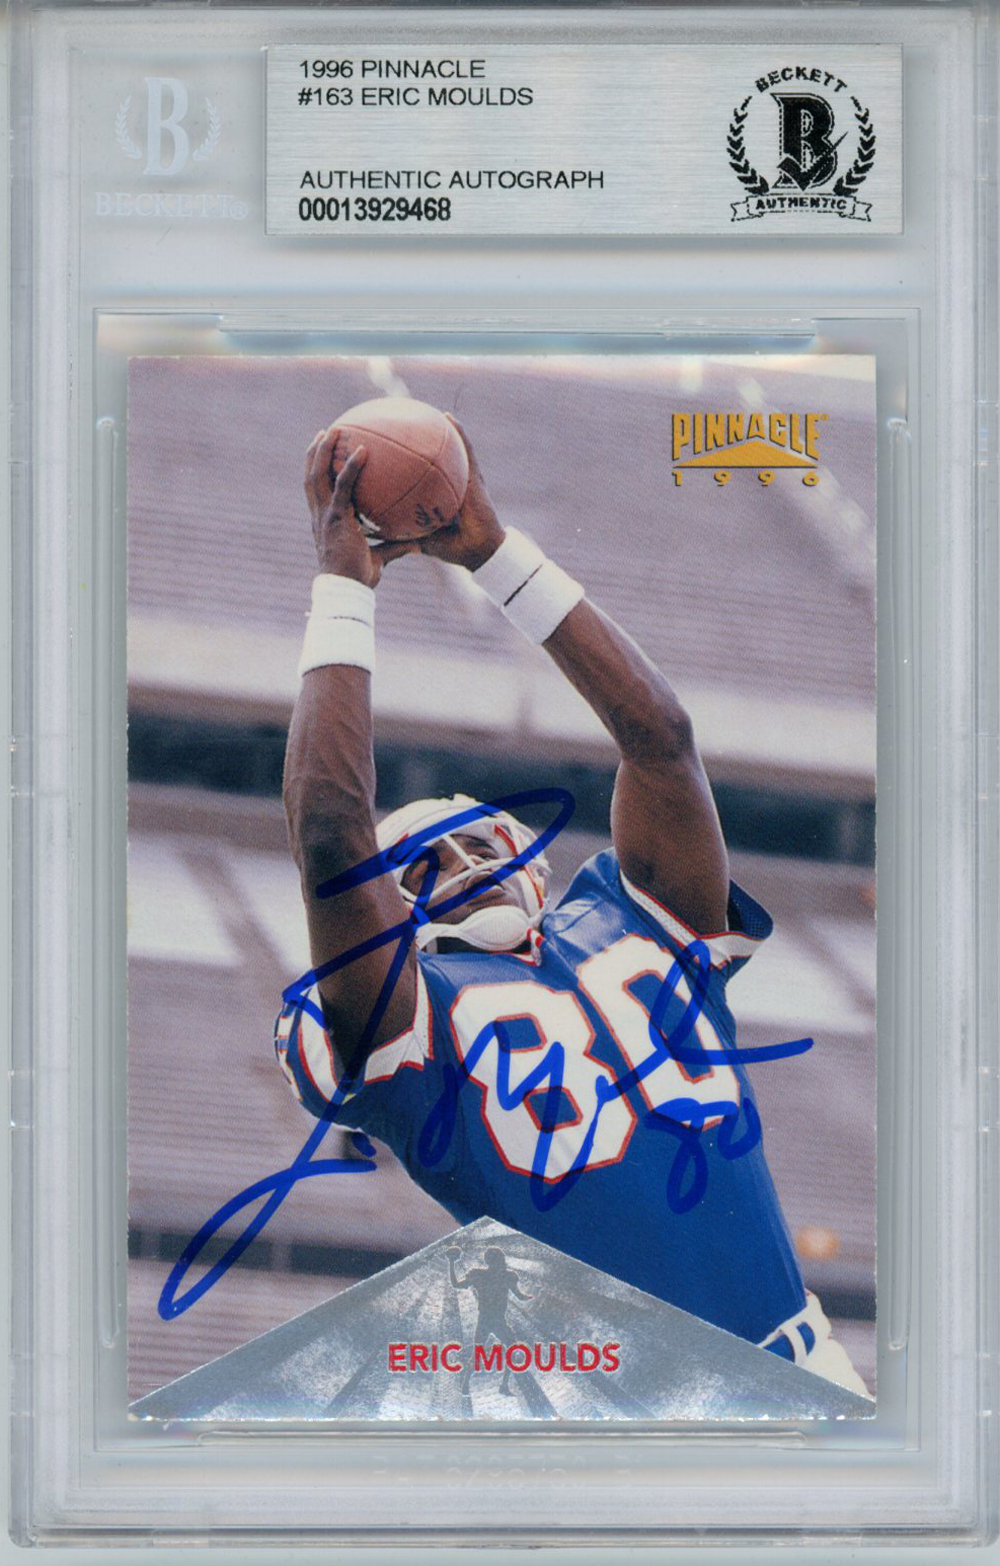 Eric Moulds Autographed 1996 Pinnacle #163 Rookie Card Beckett Slab